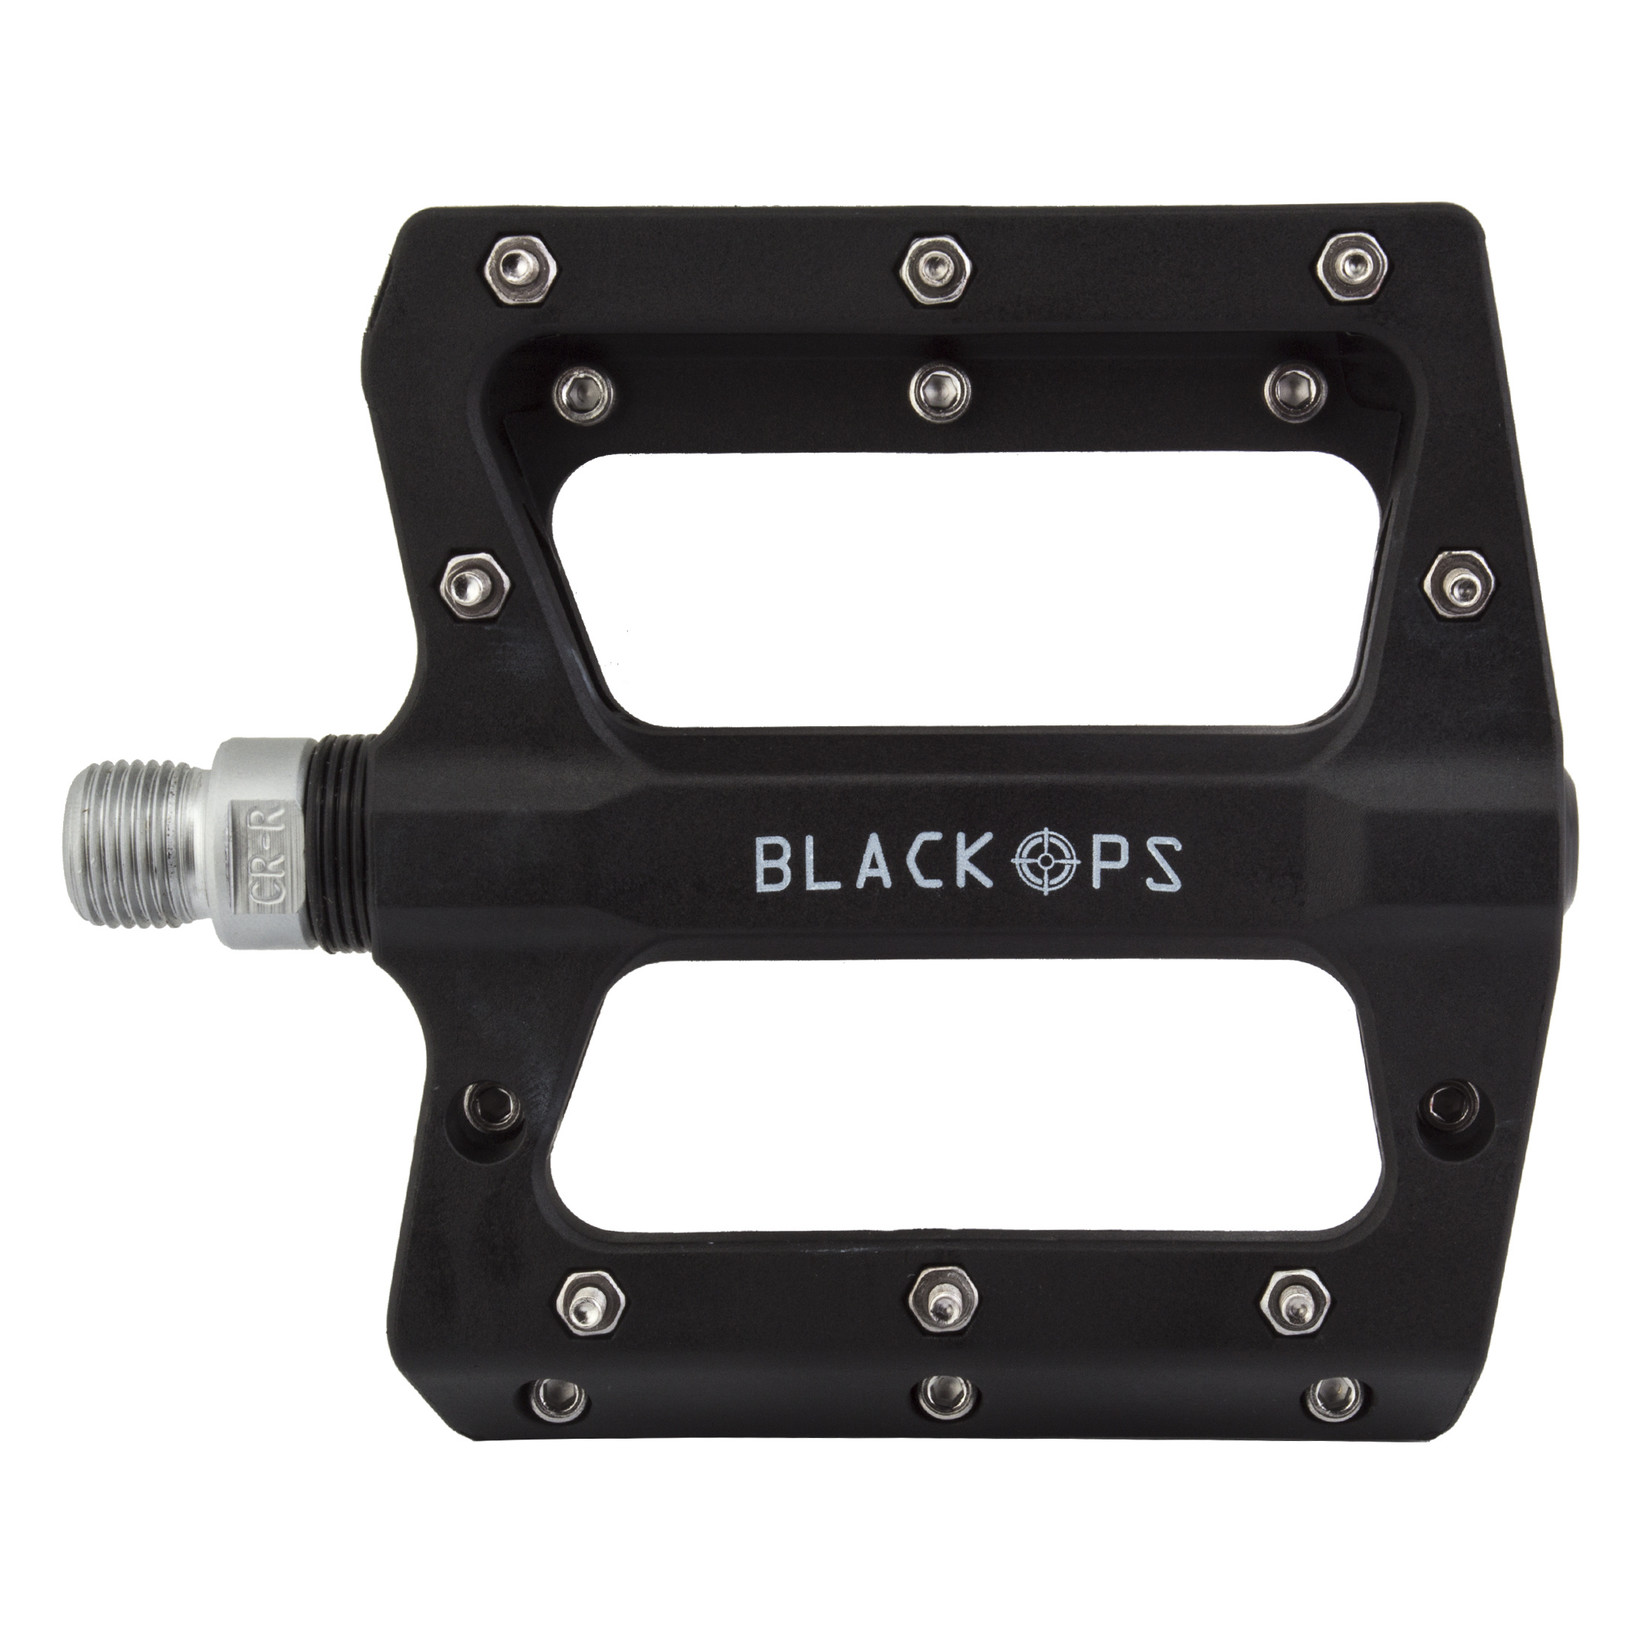 BLACK OPS Black Ops Nylo Pro II Pedals, 9/16